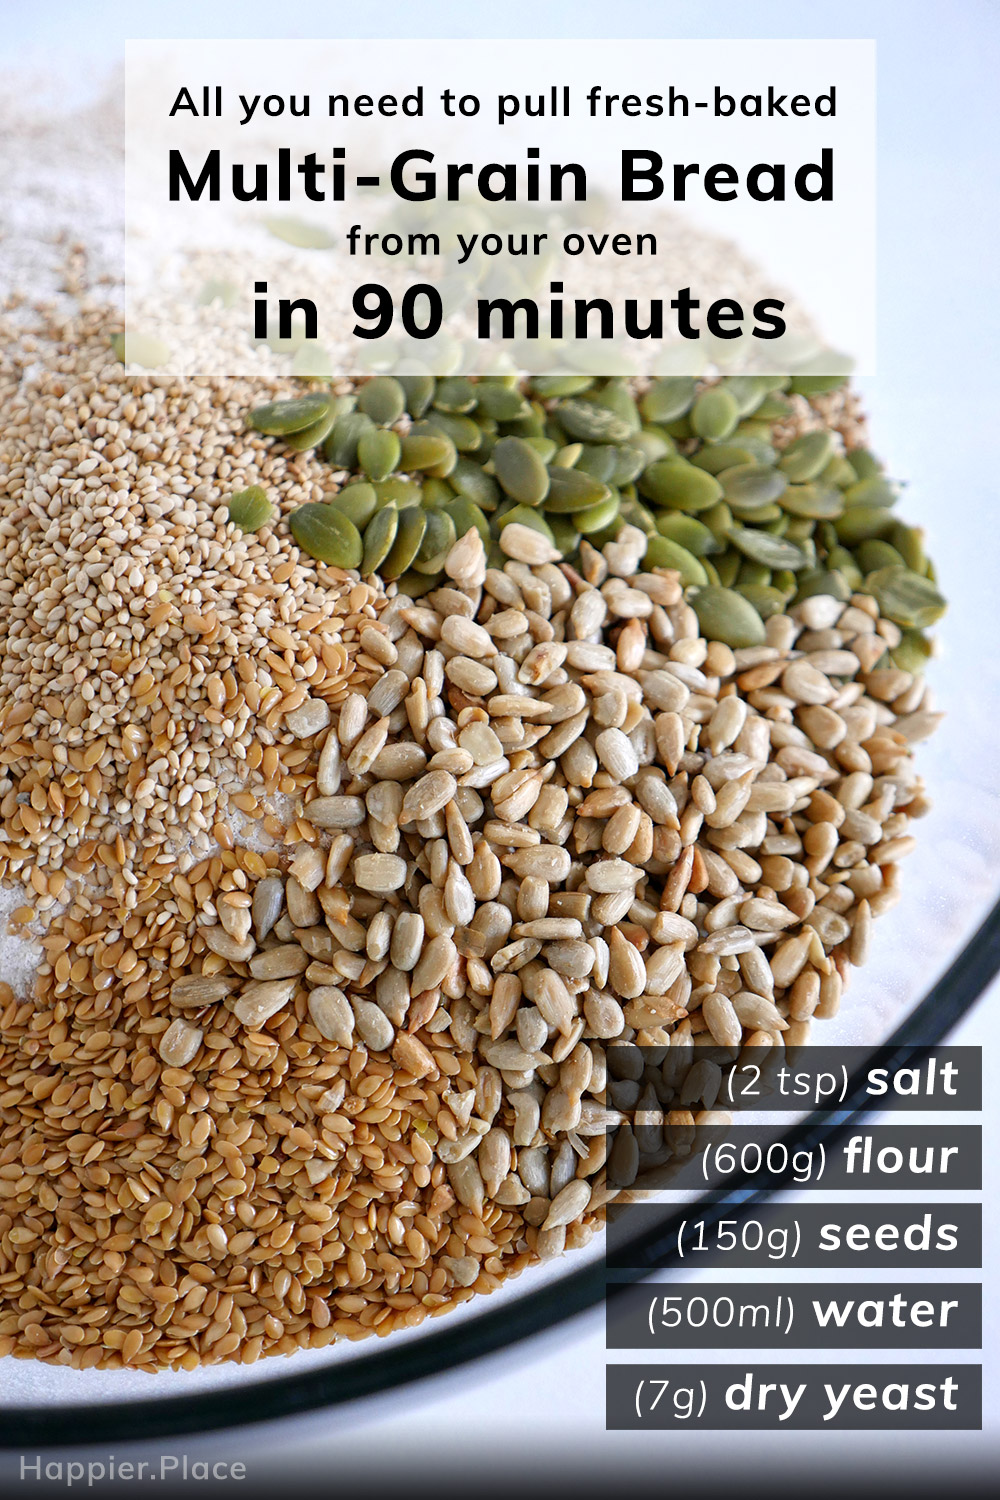 flax, sesame, sunflower, pumpkin seeds, flour - all you need to pull fresh-baked multi-grain bread from your oven in 90 minutes, with measurements